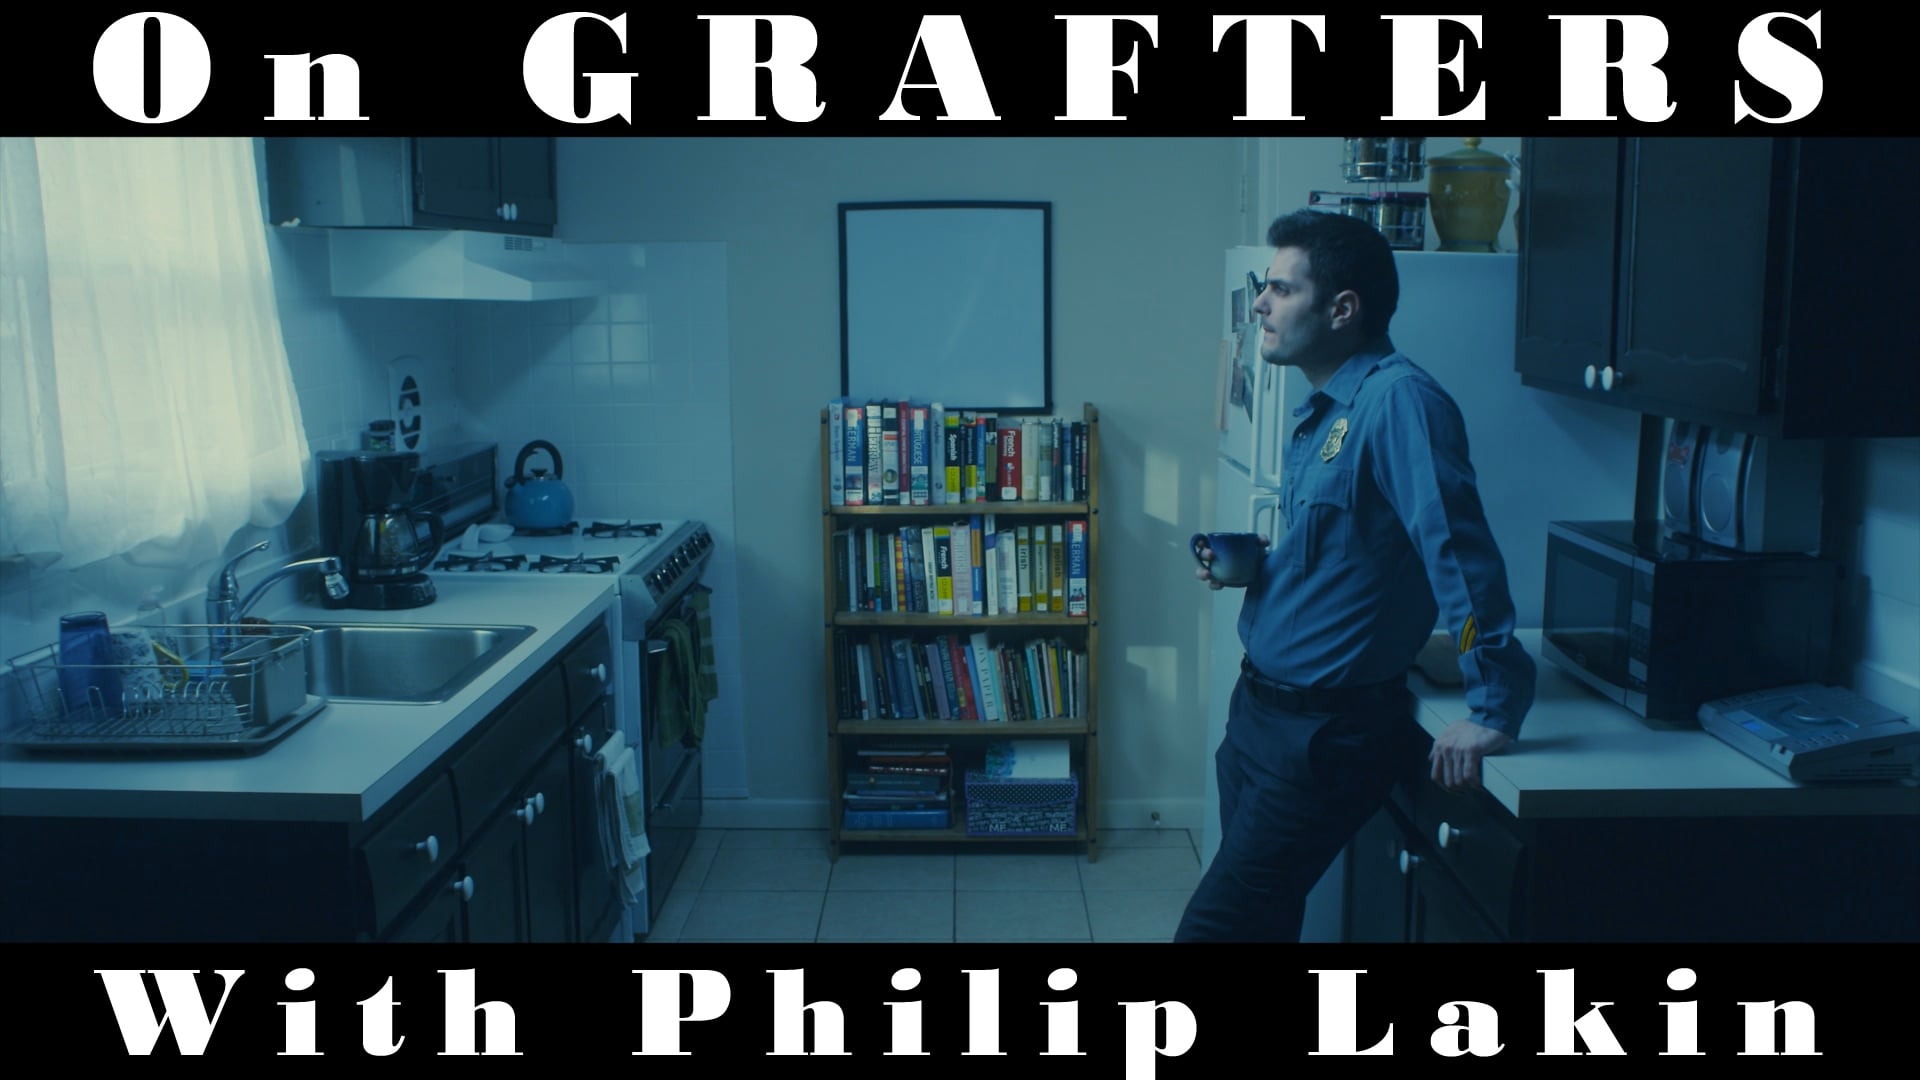 On GRAFTERS, with Philip Lakin